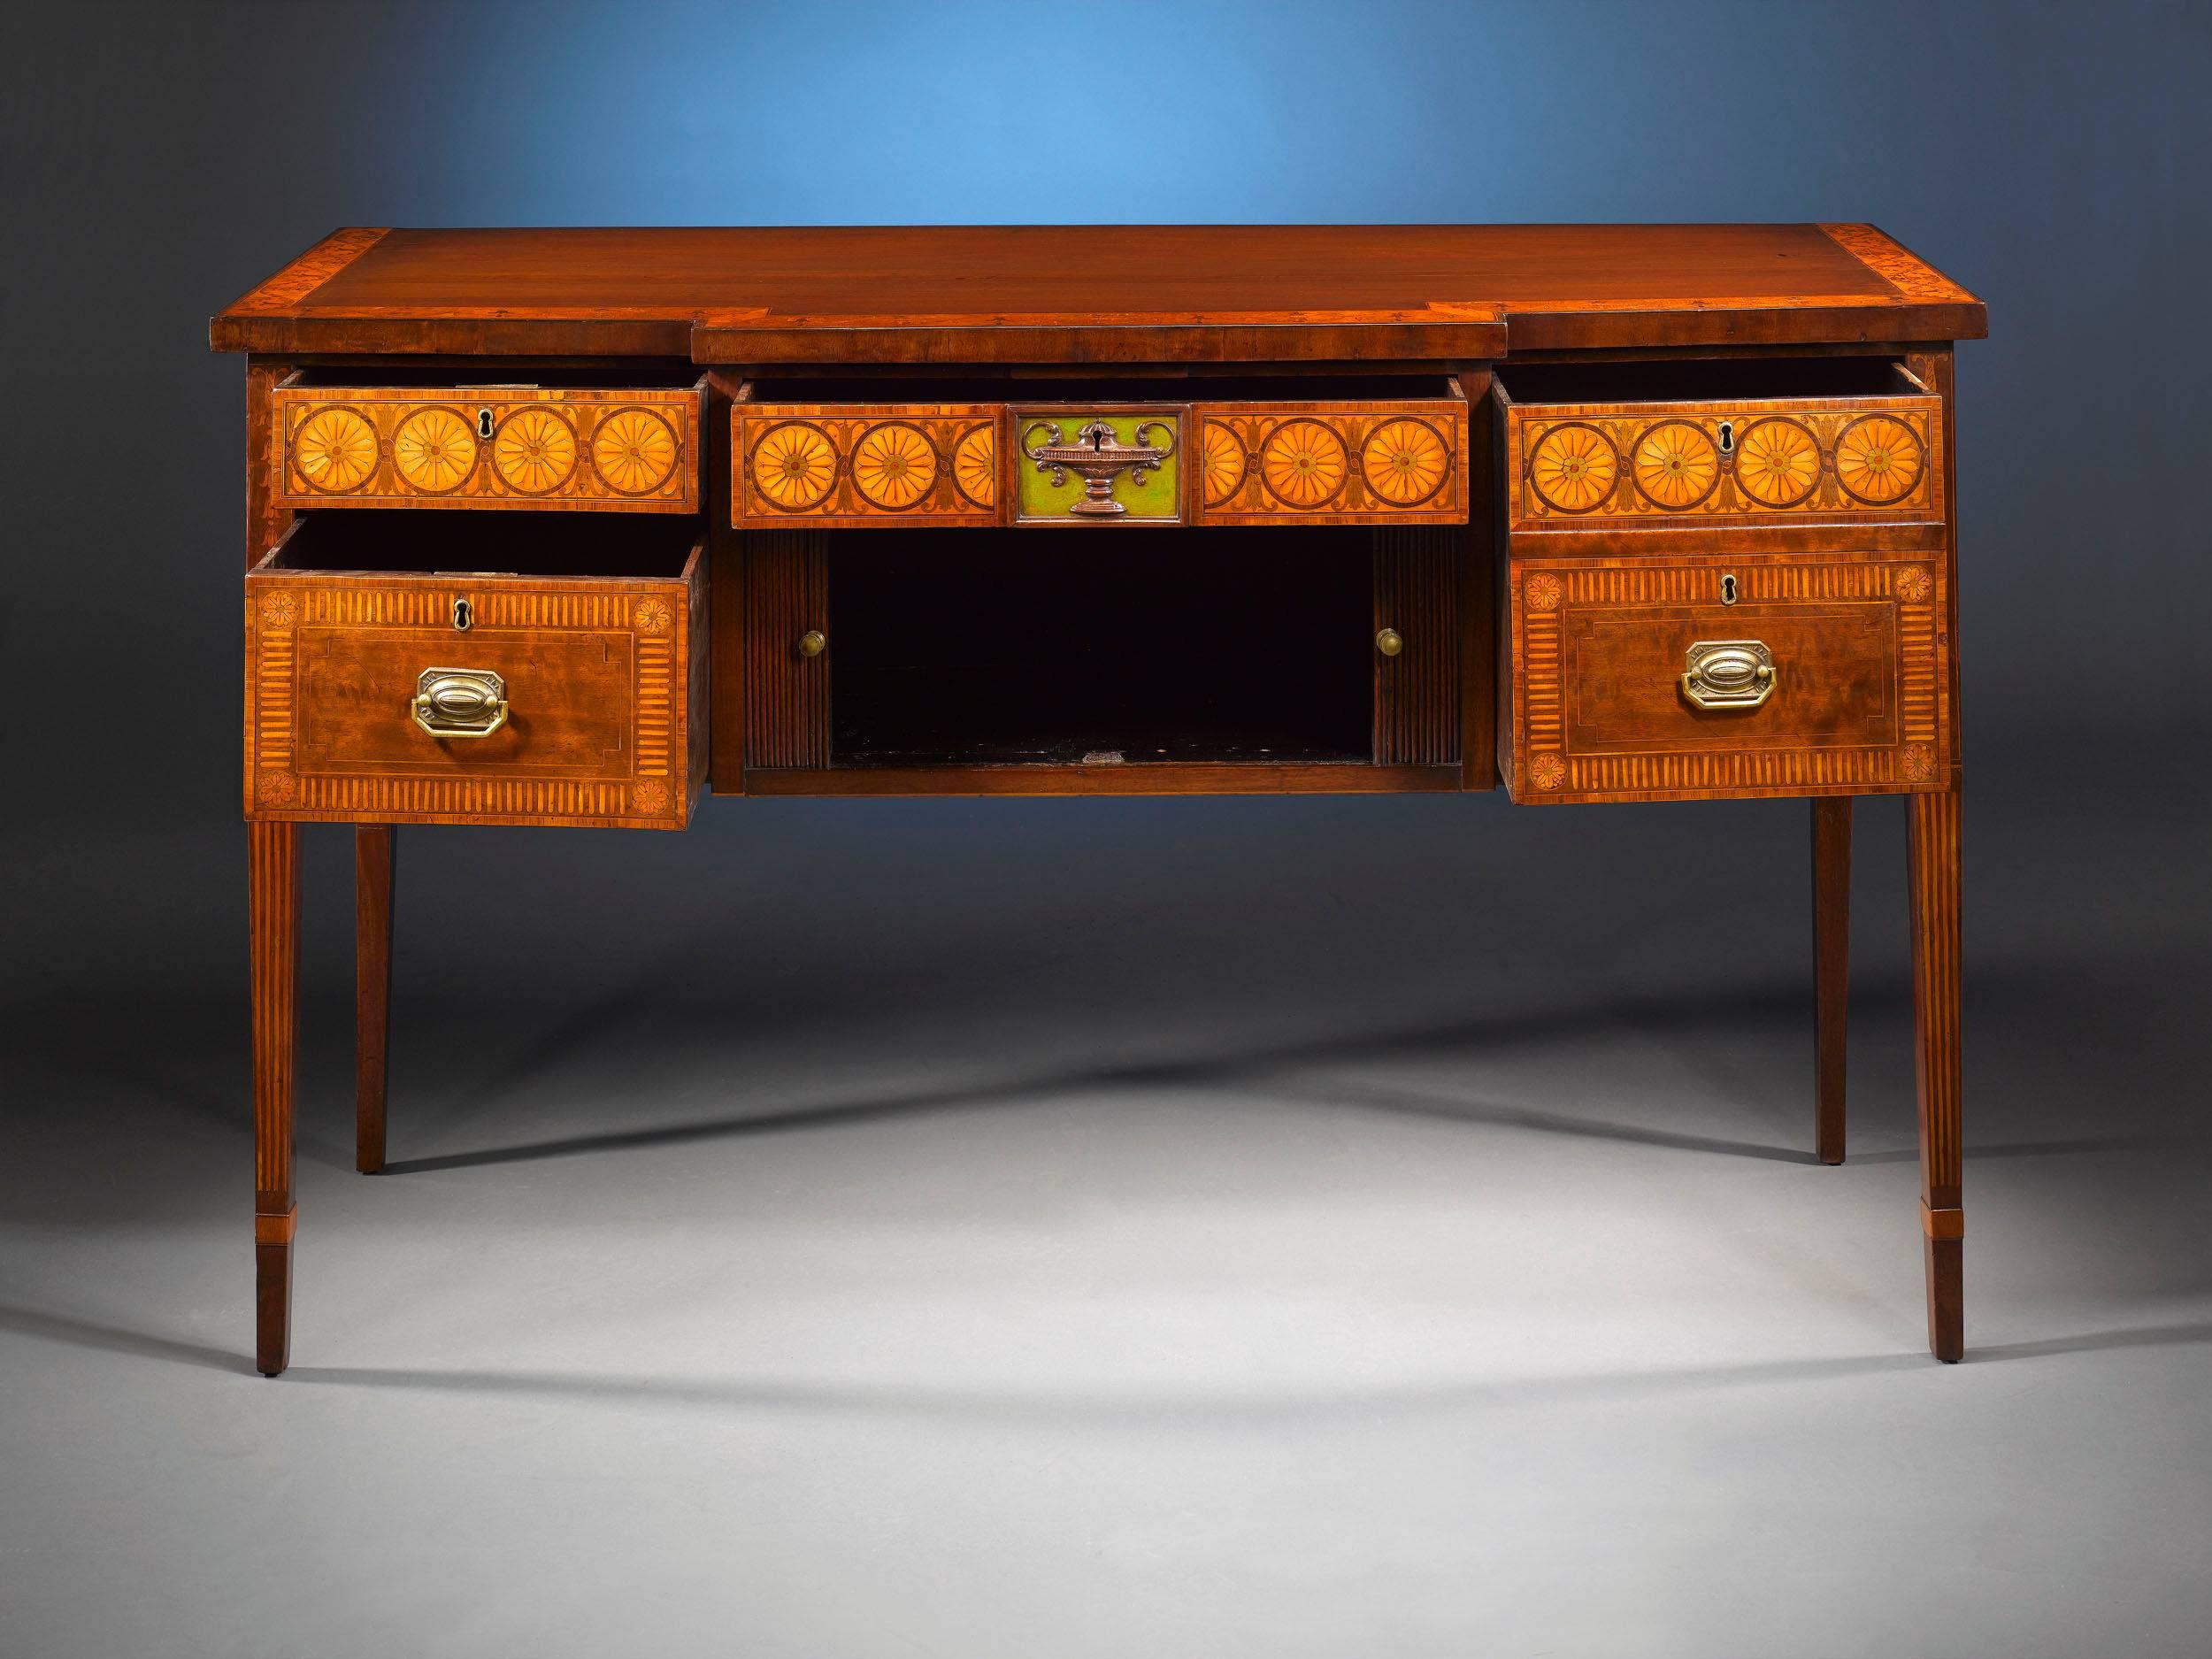 A rare and highly important, 18th century mahogany sideboard, exhibiting all the finest elements of the renowned Hepplewhite style. Exceptional marquetry inlay work of pateras and scrolls in satinwoods, rosewoods and incredibly rare green-dyed woods